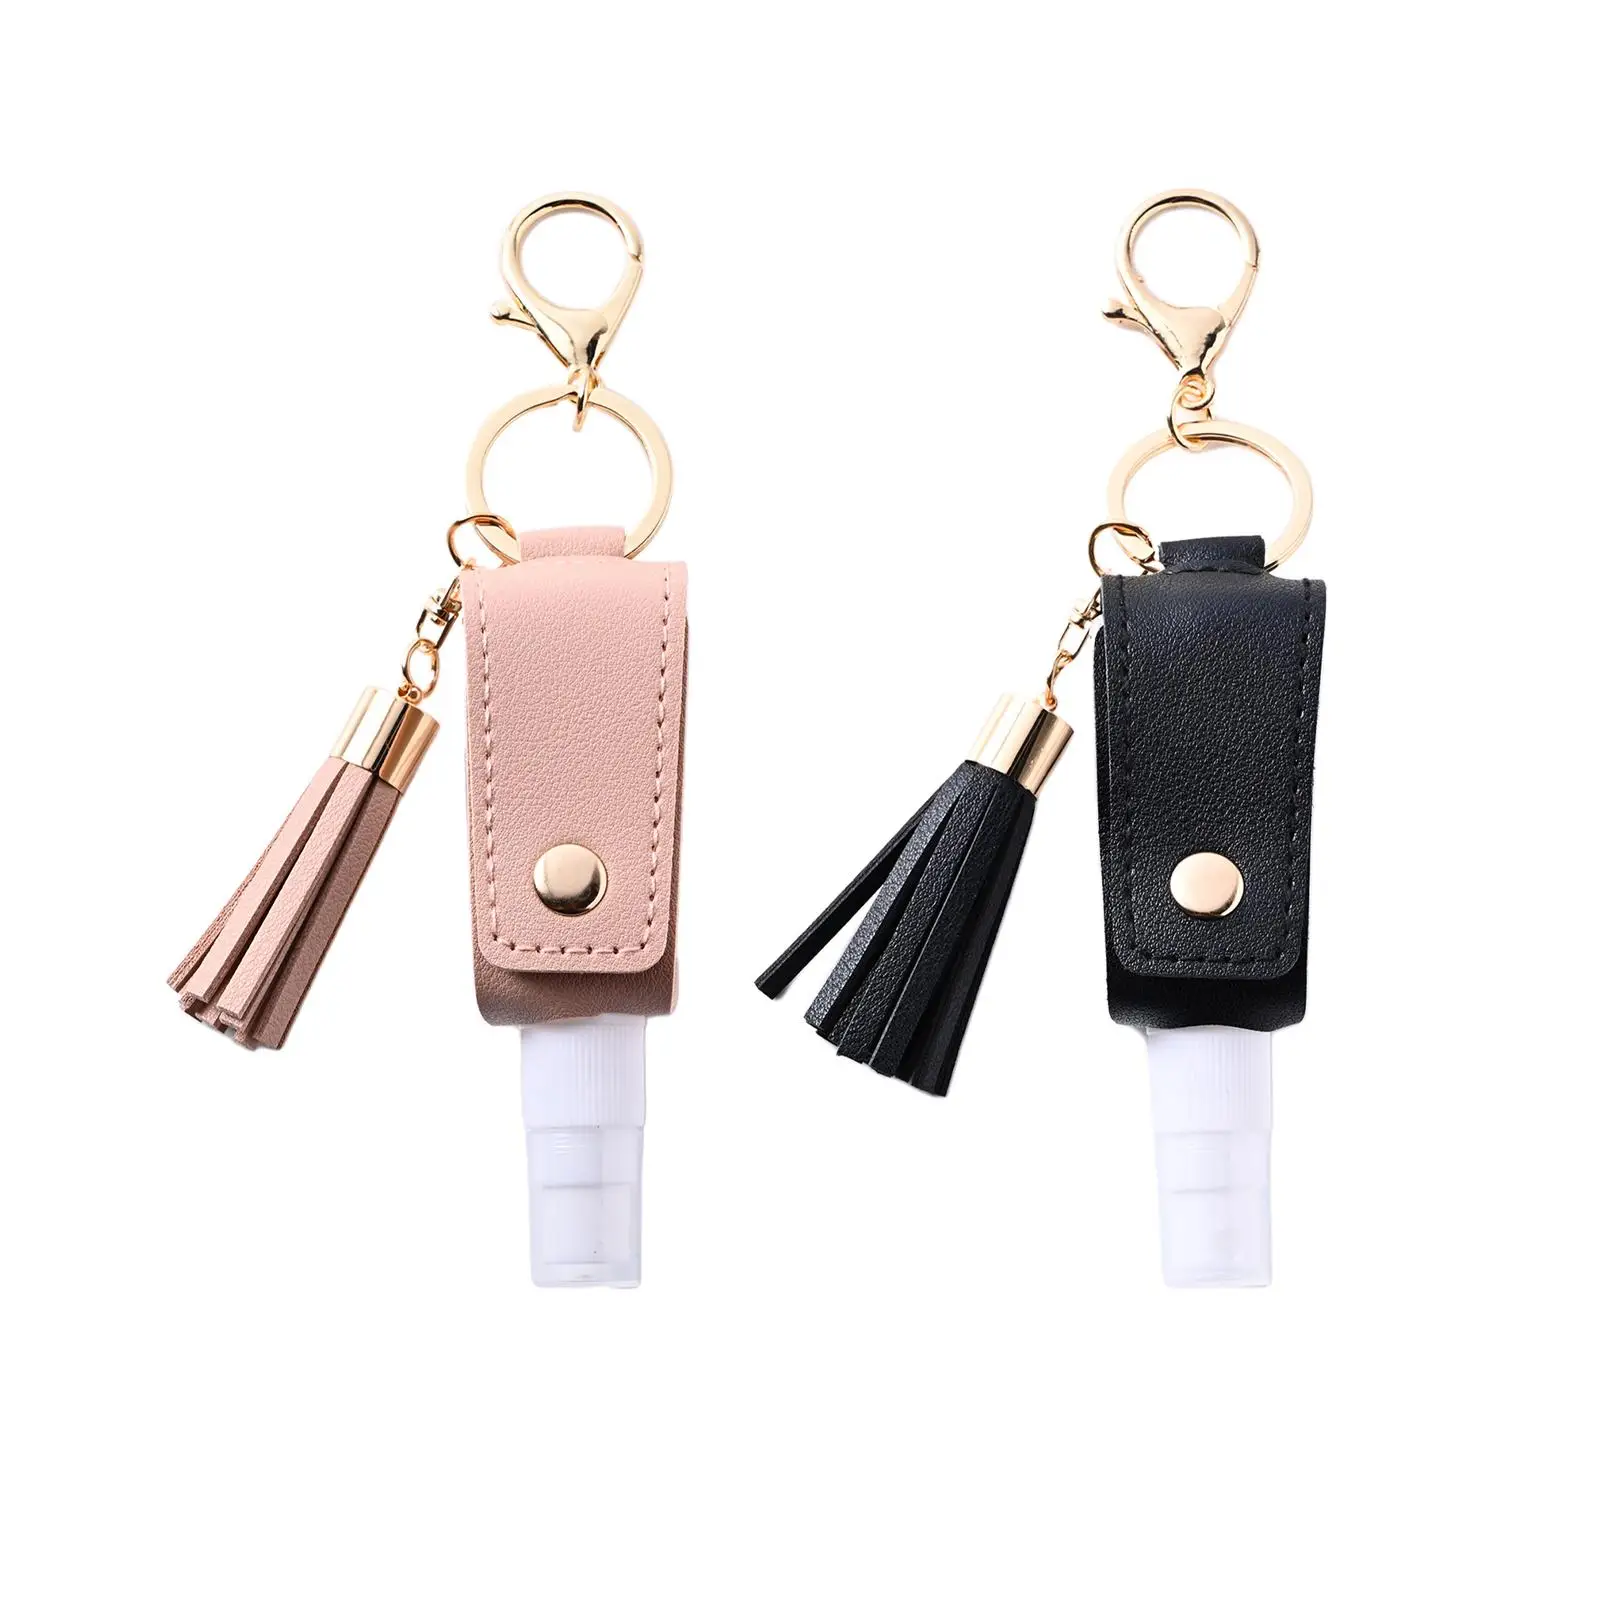 30ml Hand Washing Holder Keychain Refillable Spray Bottle Travel Size Containers Empty Bottle for Conditioner Liquid Shampoo